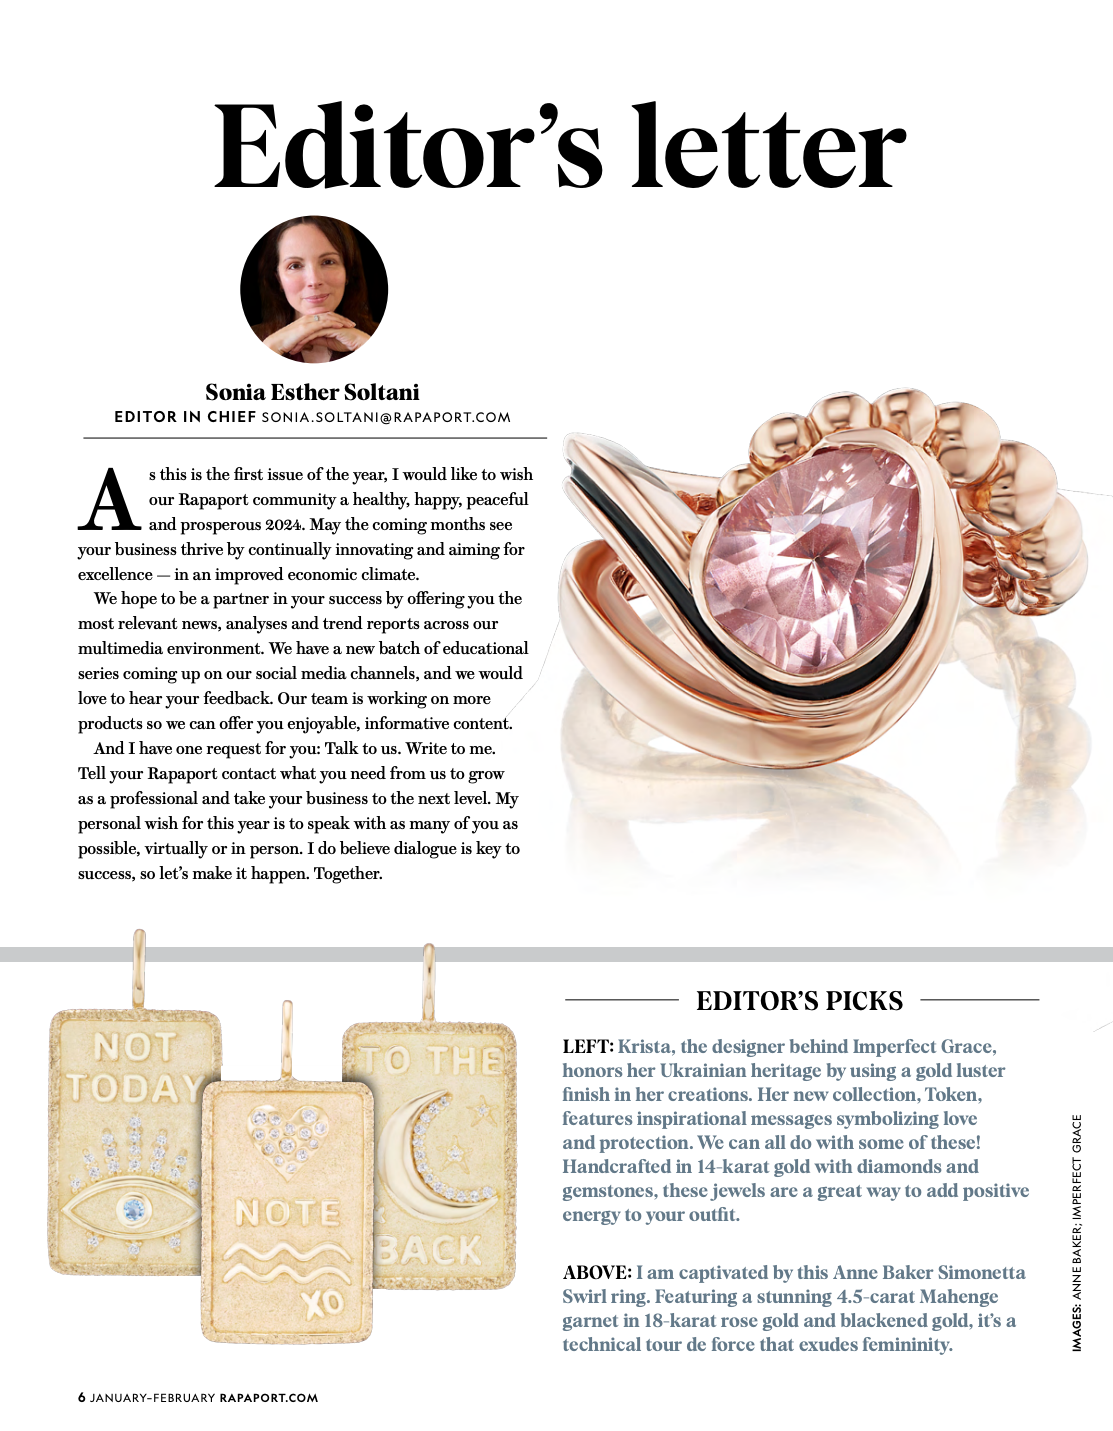 Simonetta Swirl Ring Featured in Rapaport Magazine as an Editor's Pick.